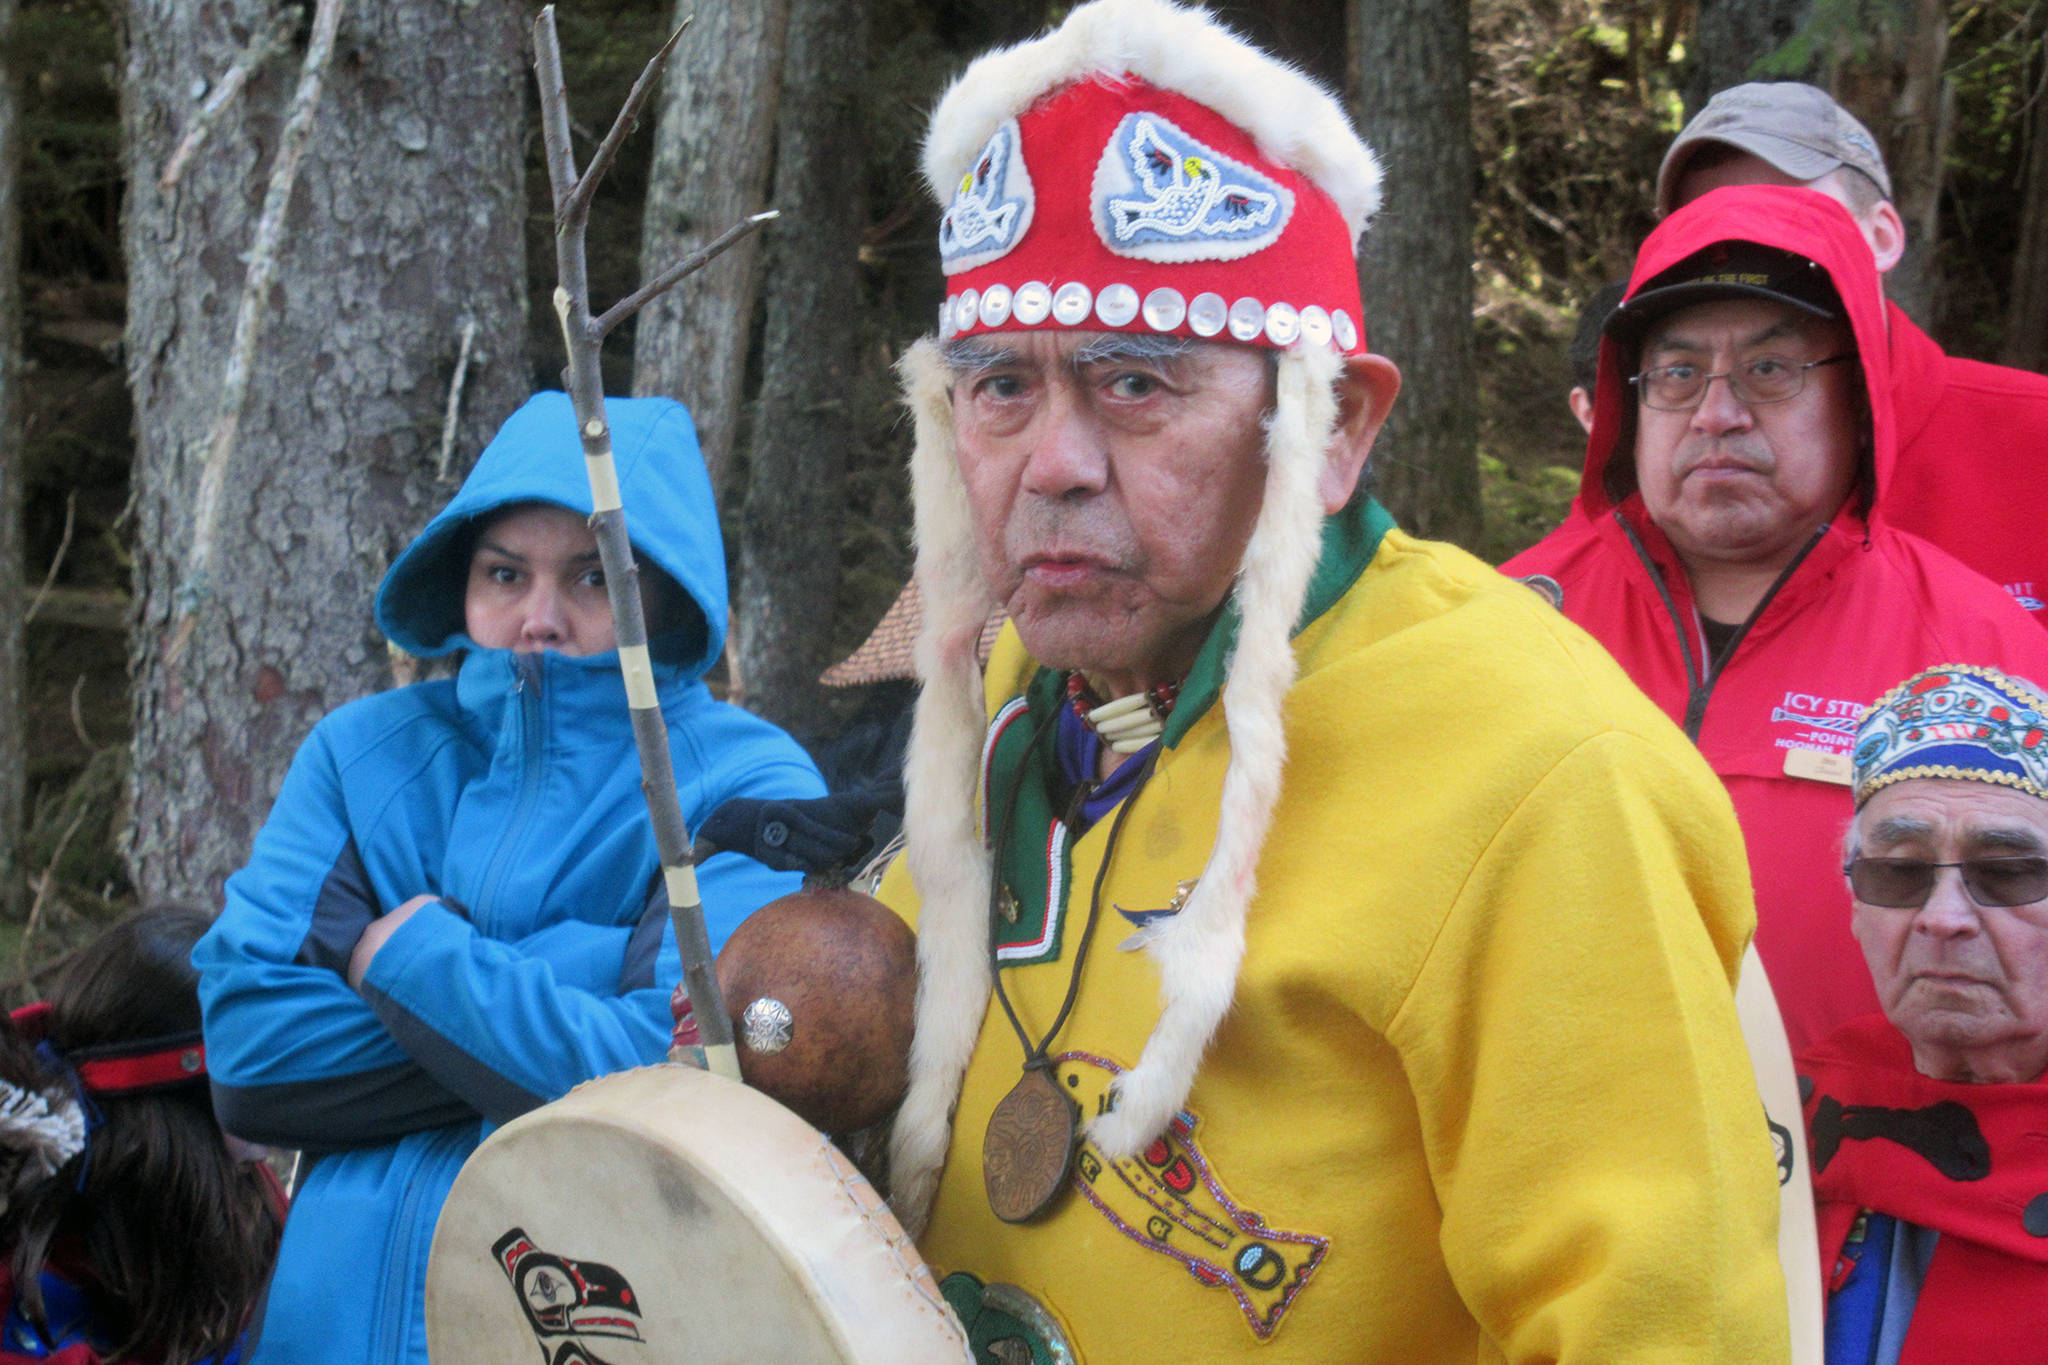 George “Digger” Dalton Jr. stands in regalia during a ground breaking and ground blessing ceremony for at the site of a new dock being built at Icy Strait Point near Hoonah, May 1, 2019. (Ben Hohenstatt | Juneau Empire)